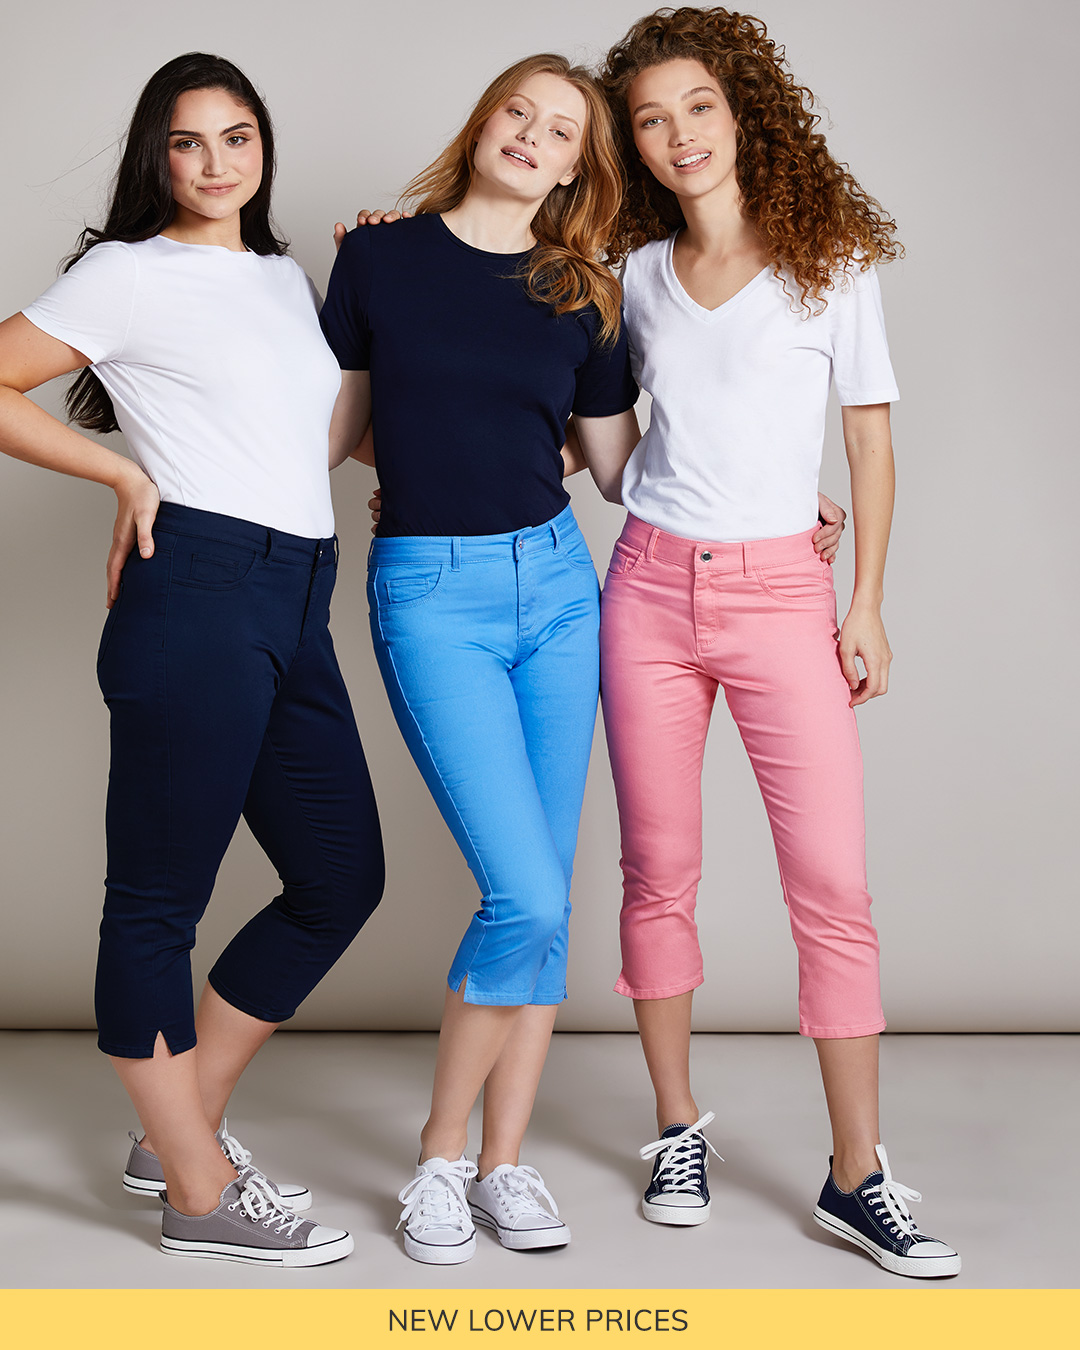 These popular crops from Dunnes Stores make light work of everyday styling